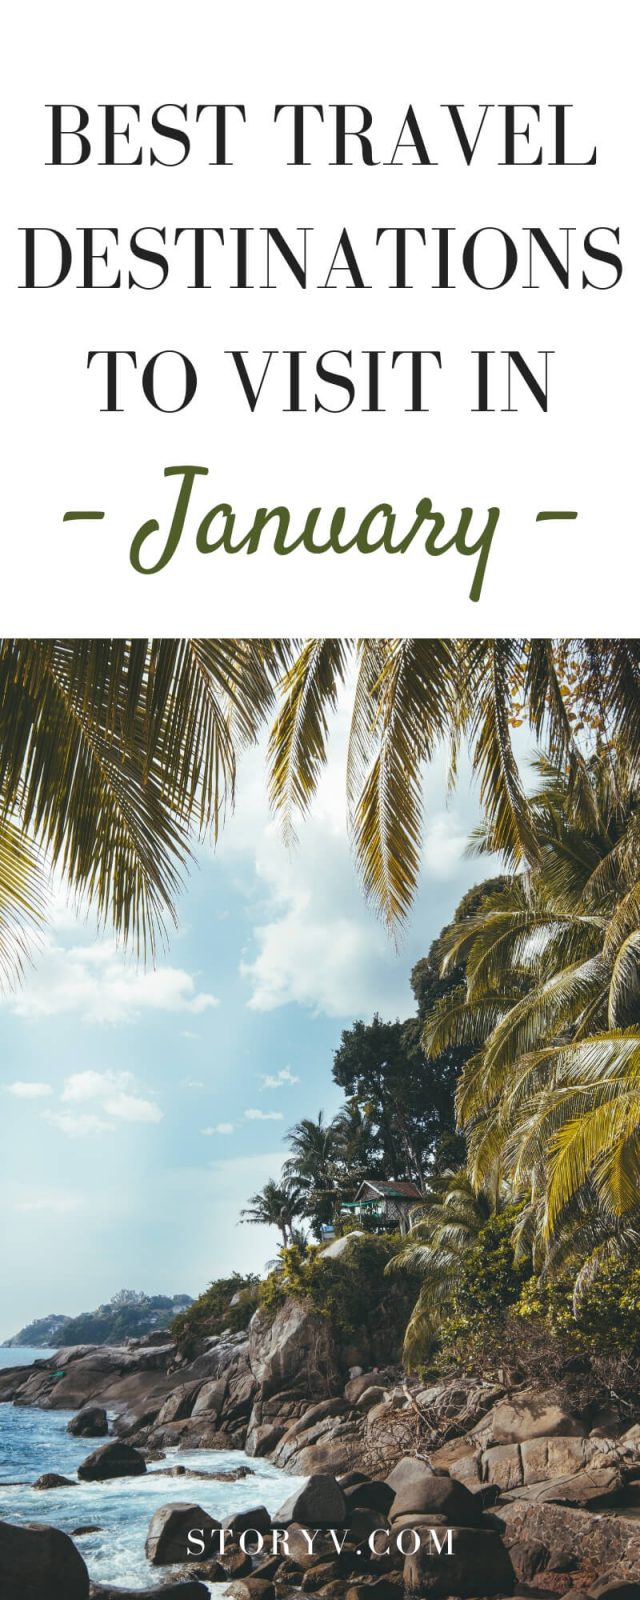 If your new years resolution is to travel more, then what better month to start than January? Enjoy ideal temperatures and good times by visiting any of these 8 best travel destinations to visit in January 2019!